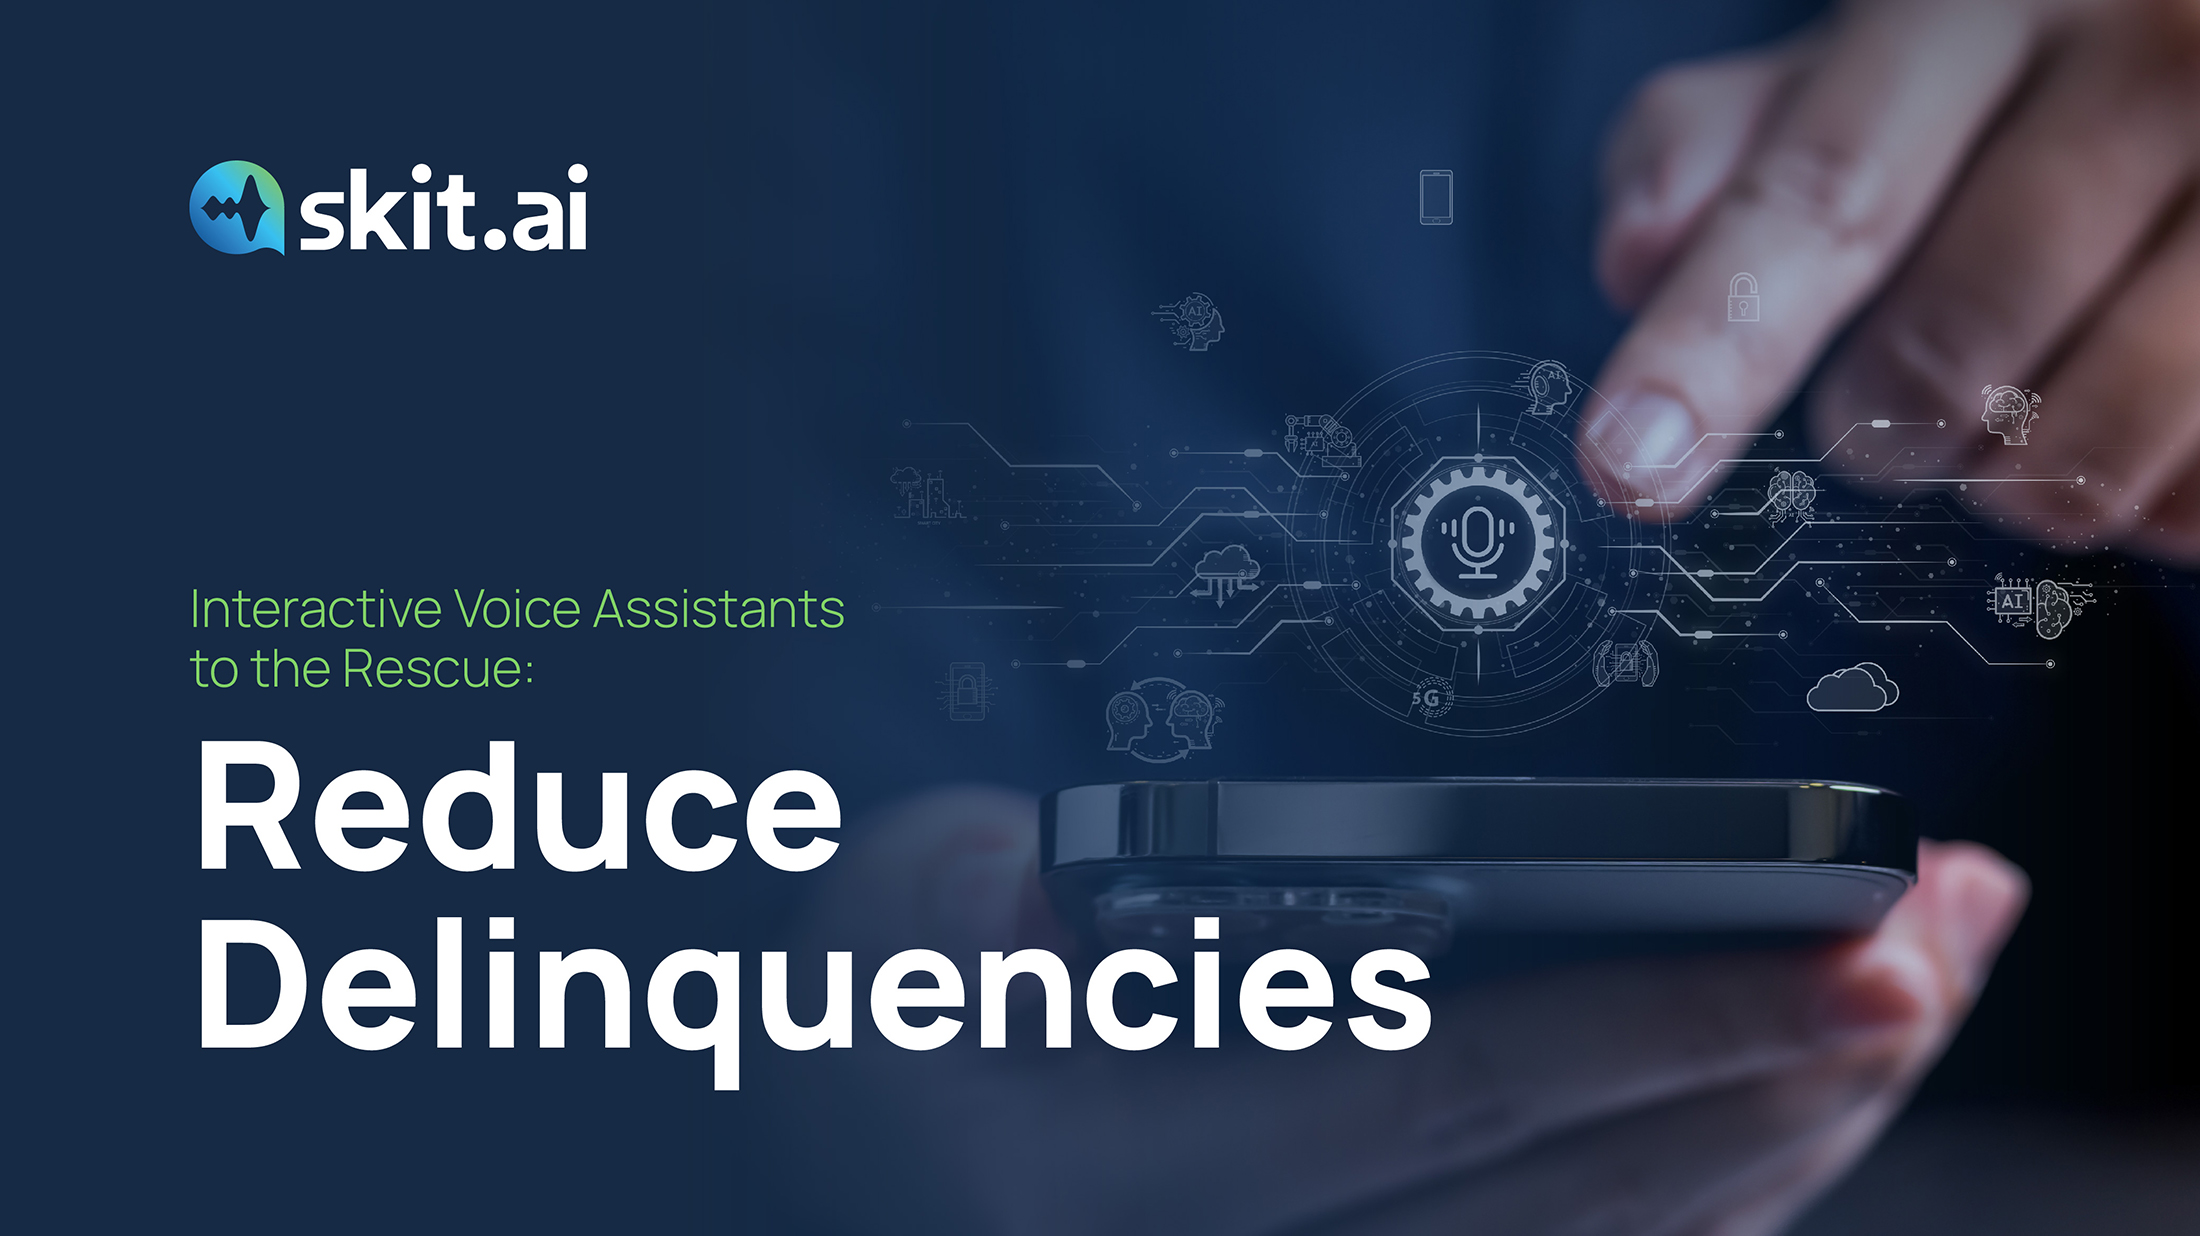 How Can You Reduce High Delinquencies with Voice AI?